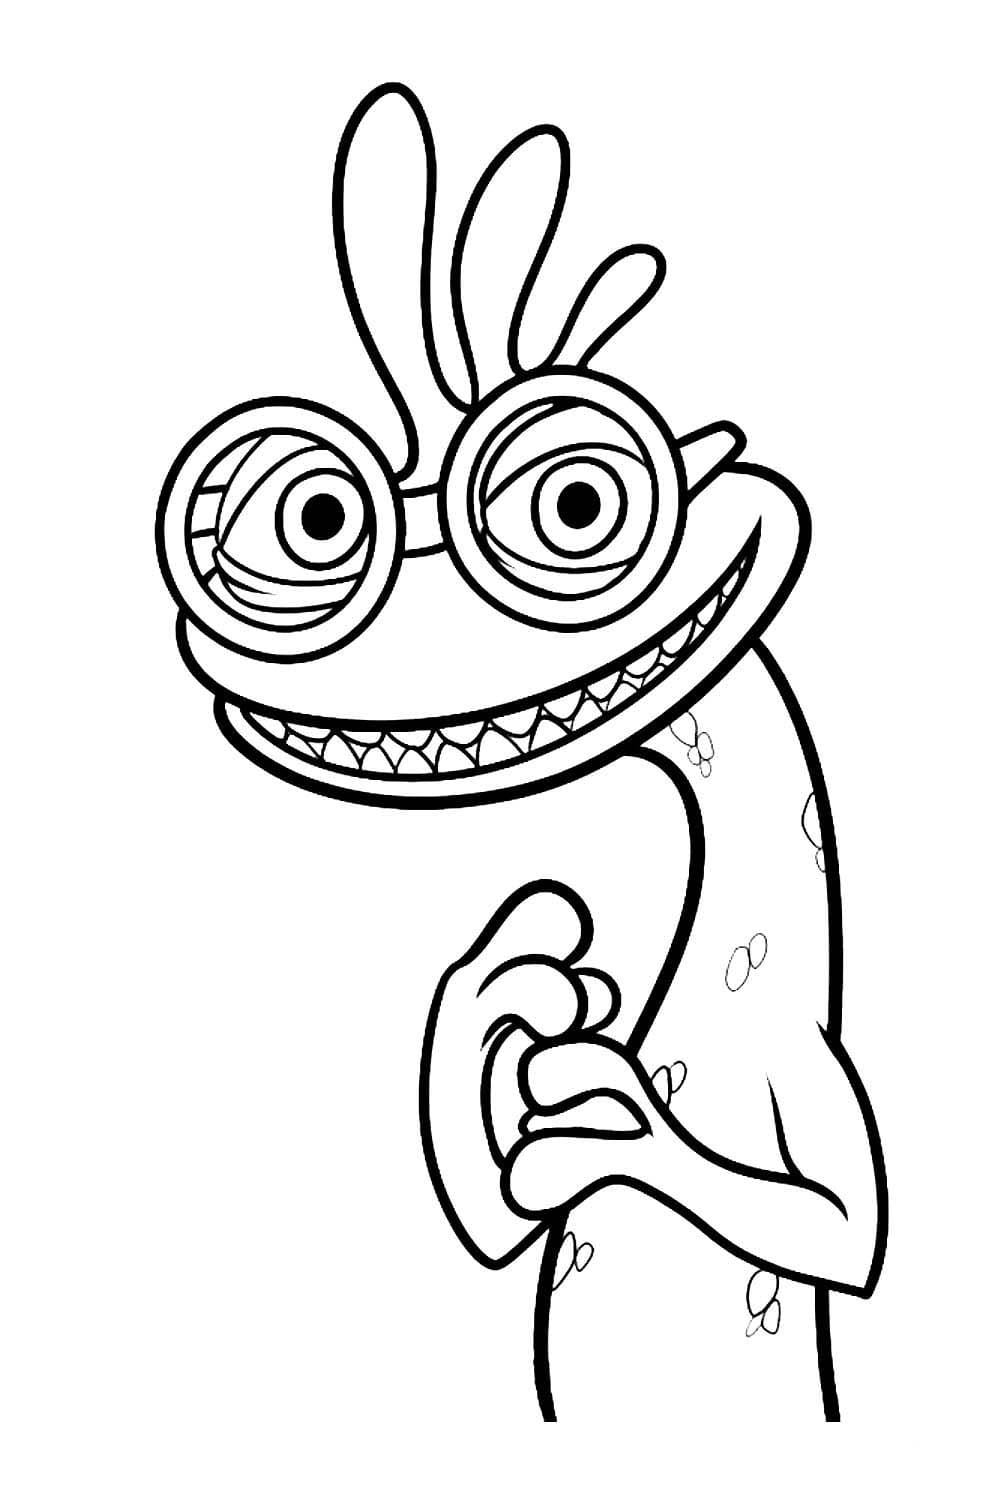 Monsters Inc Coloring Sheet Monster Coloring Pages Cartoon Coloring